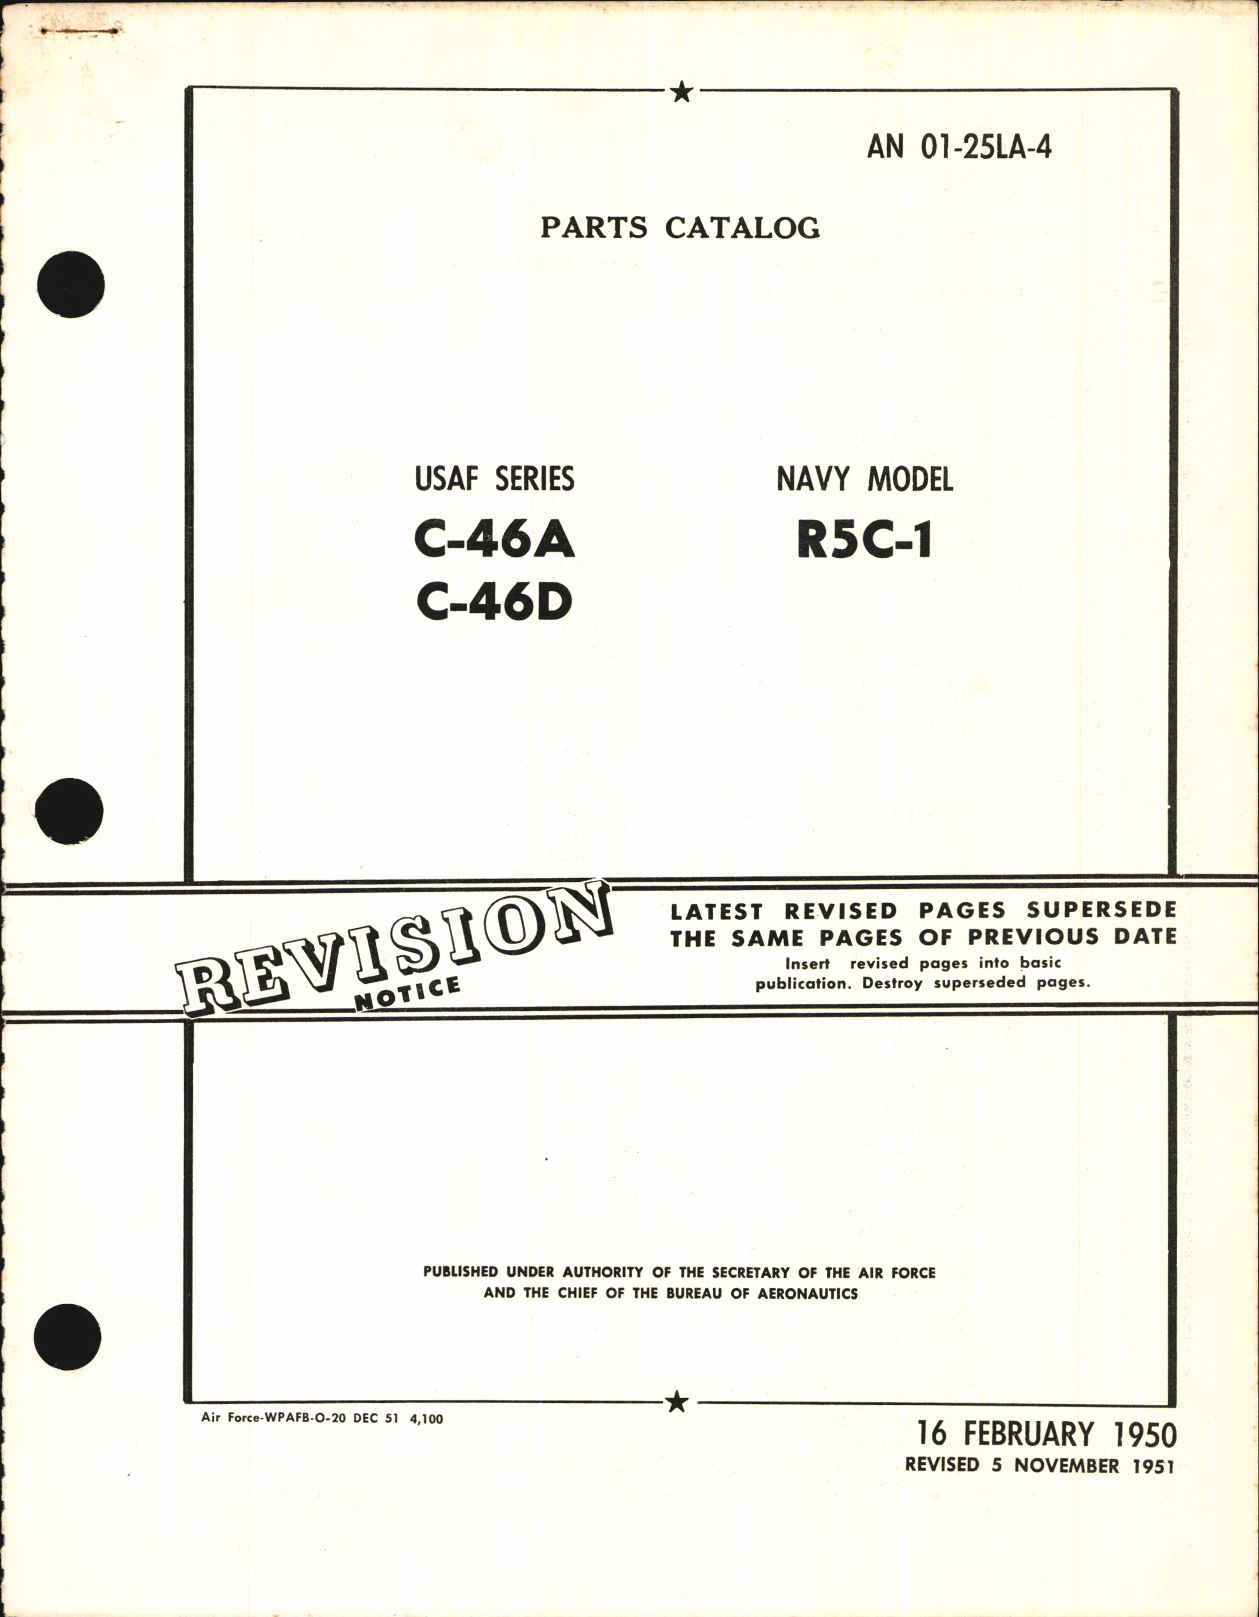 Sample page 1 from AirCorps Library document: Parts Catalog for C-46A, C-46D, and R5C-1